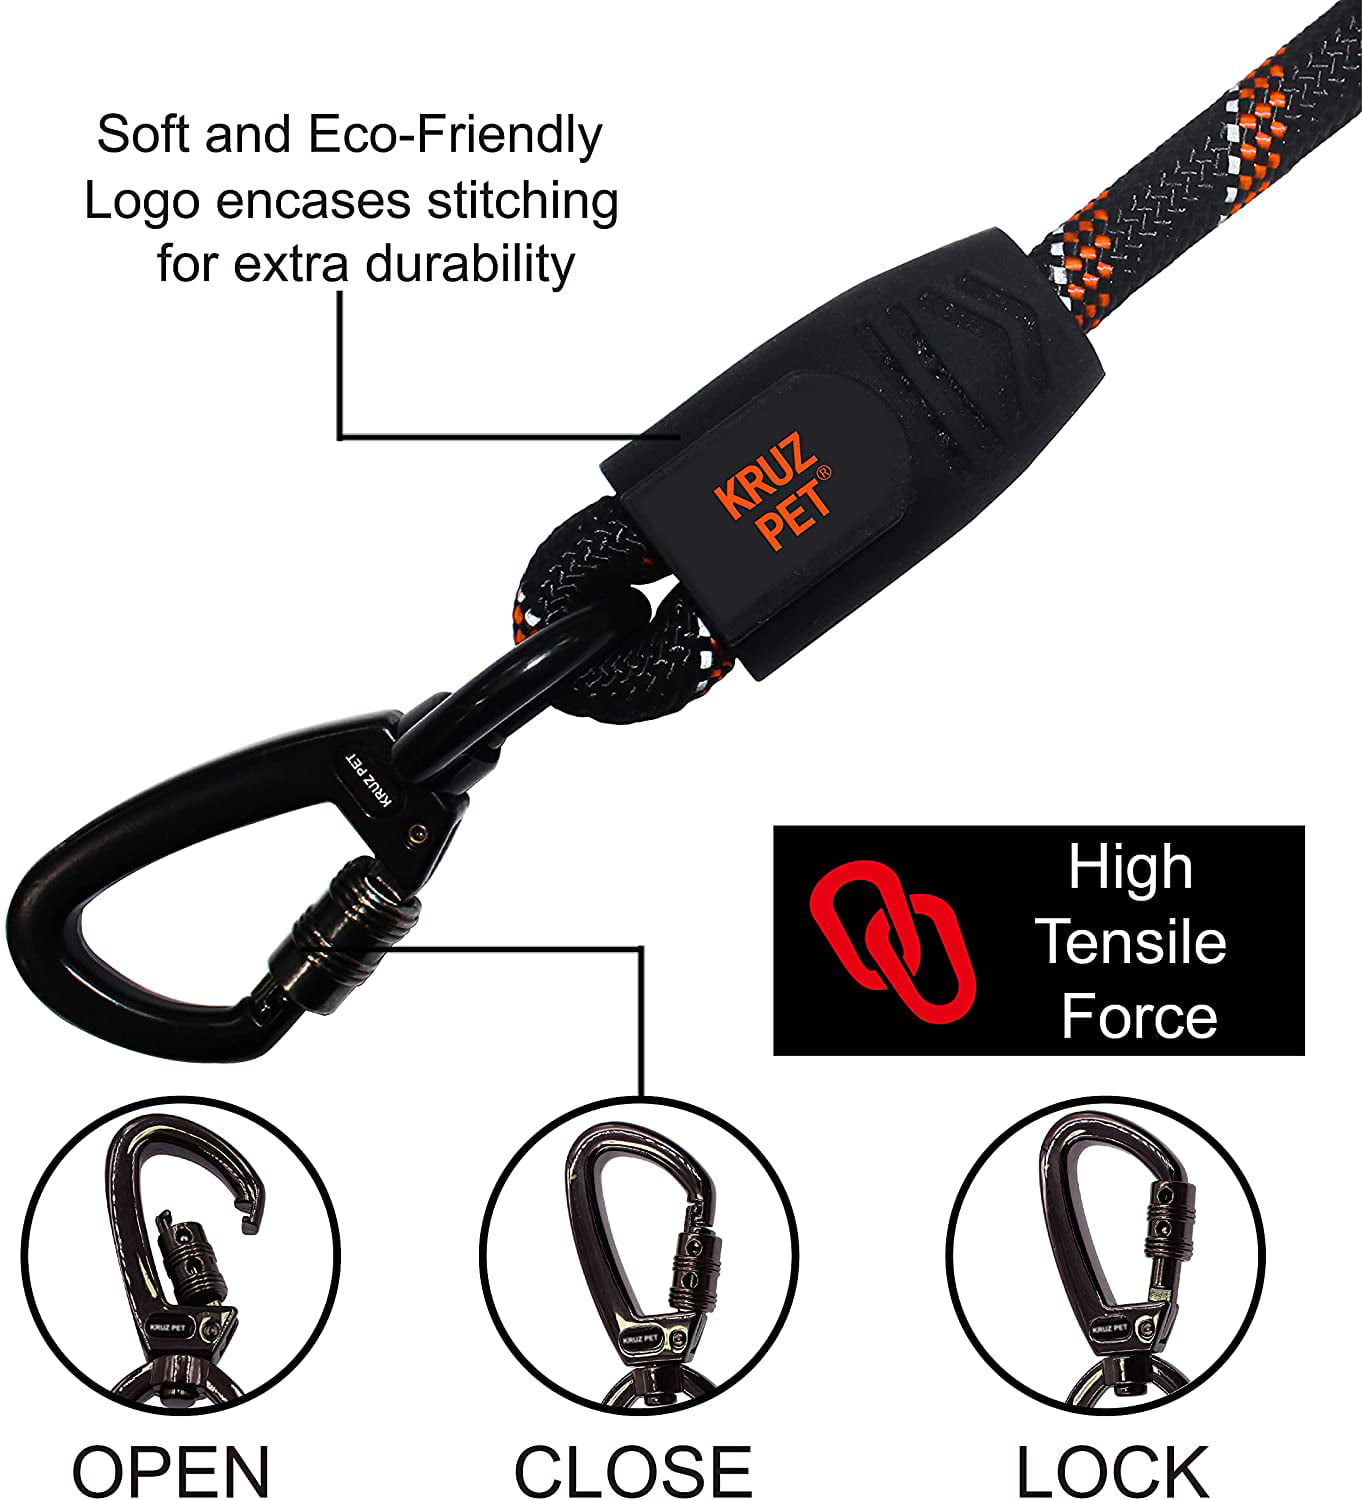 Security Heavy-Duty Running and Pet Training and Comfort Kruz Reflective Dog Leash -KZROPE5048/5060 Control Safety Walking Soft Silicone Grip with Click & Lock Snap Durable Rope 